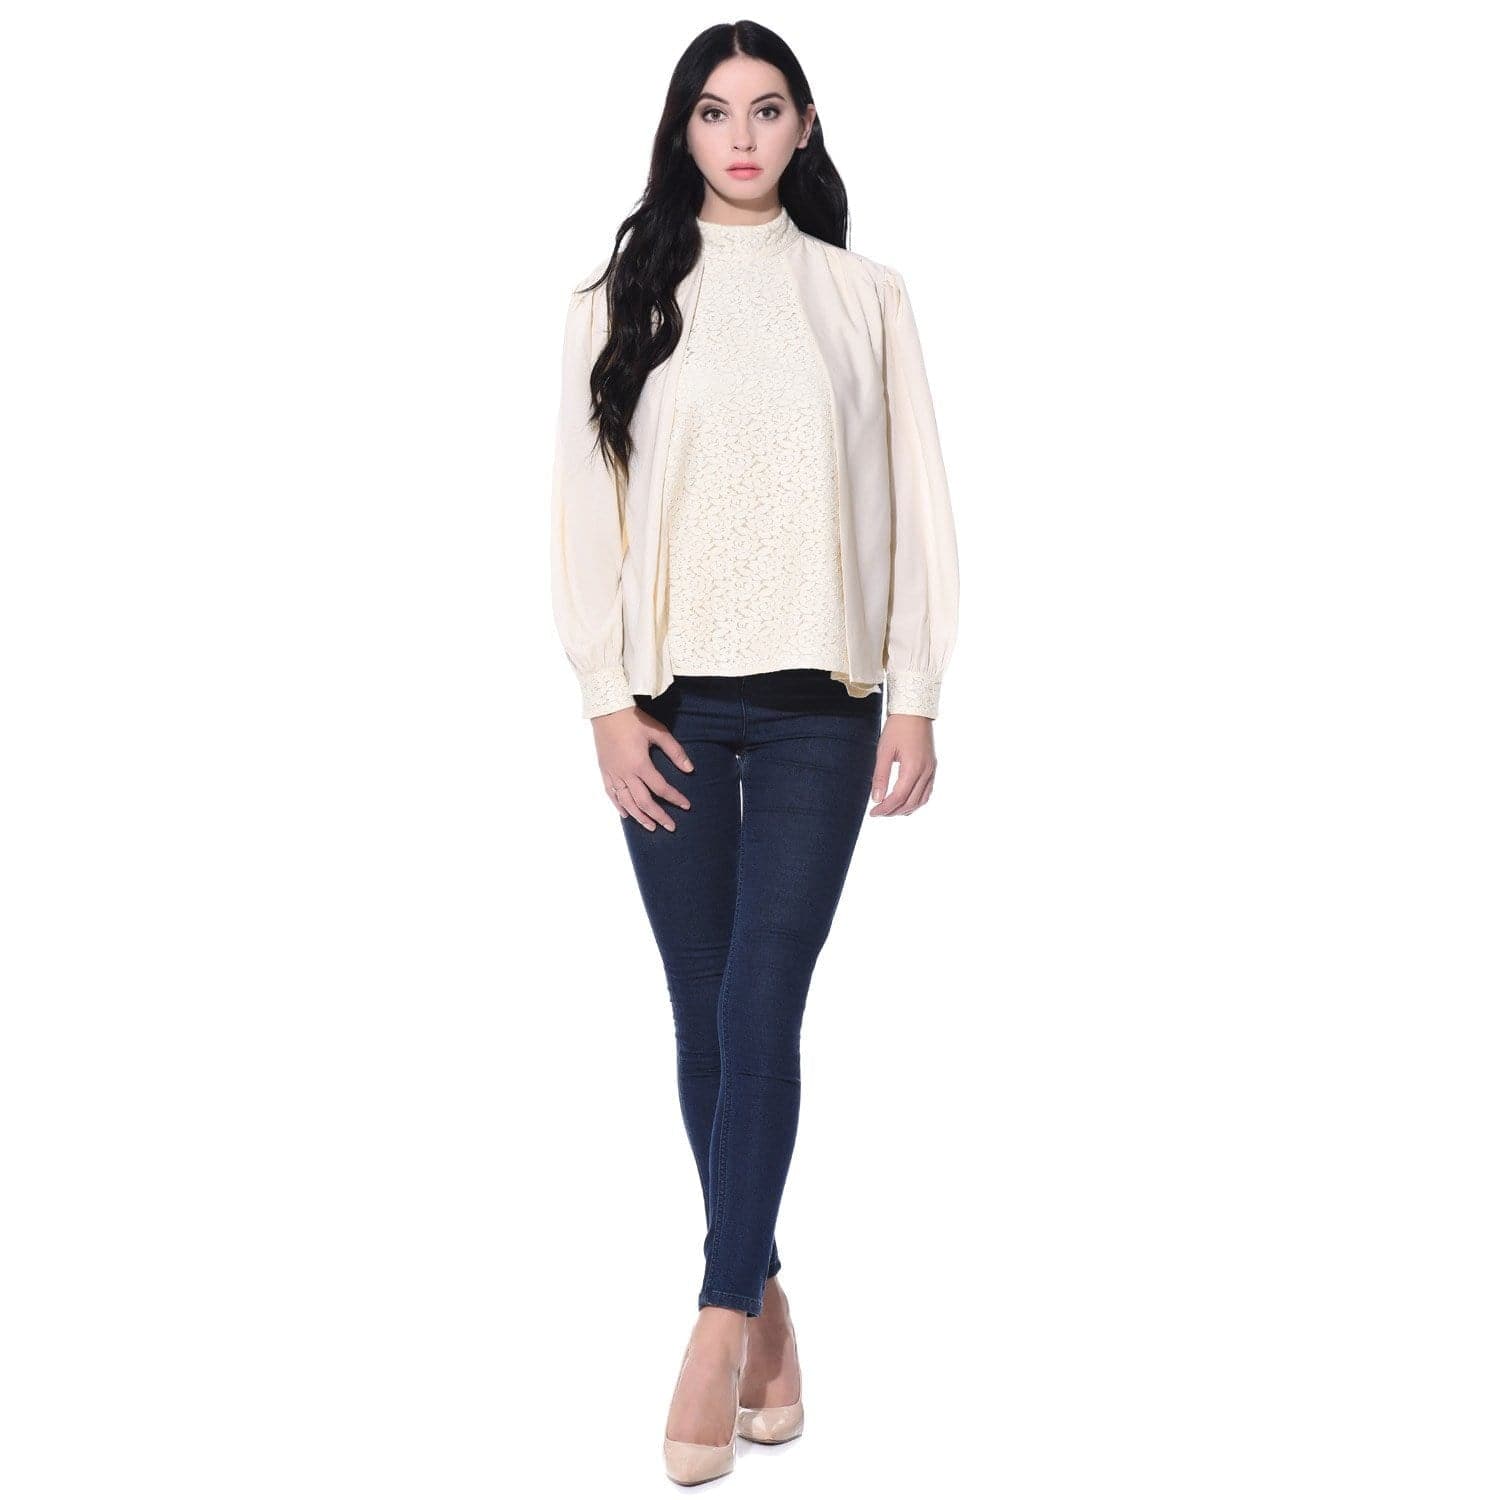 Solid White Long Sleeves Casual Crepe Lace Top - Uptownie